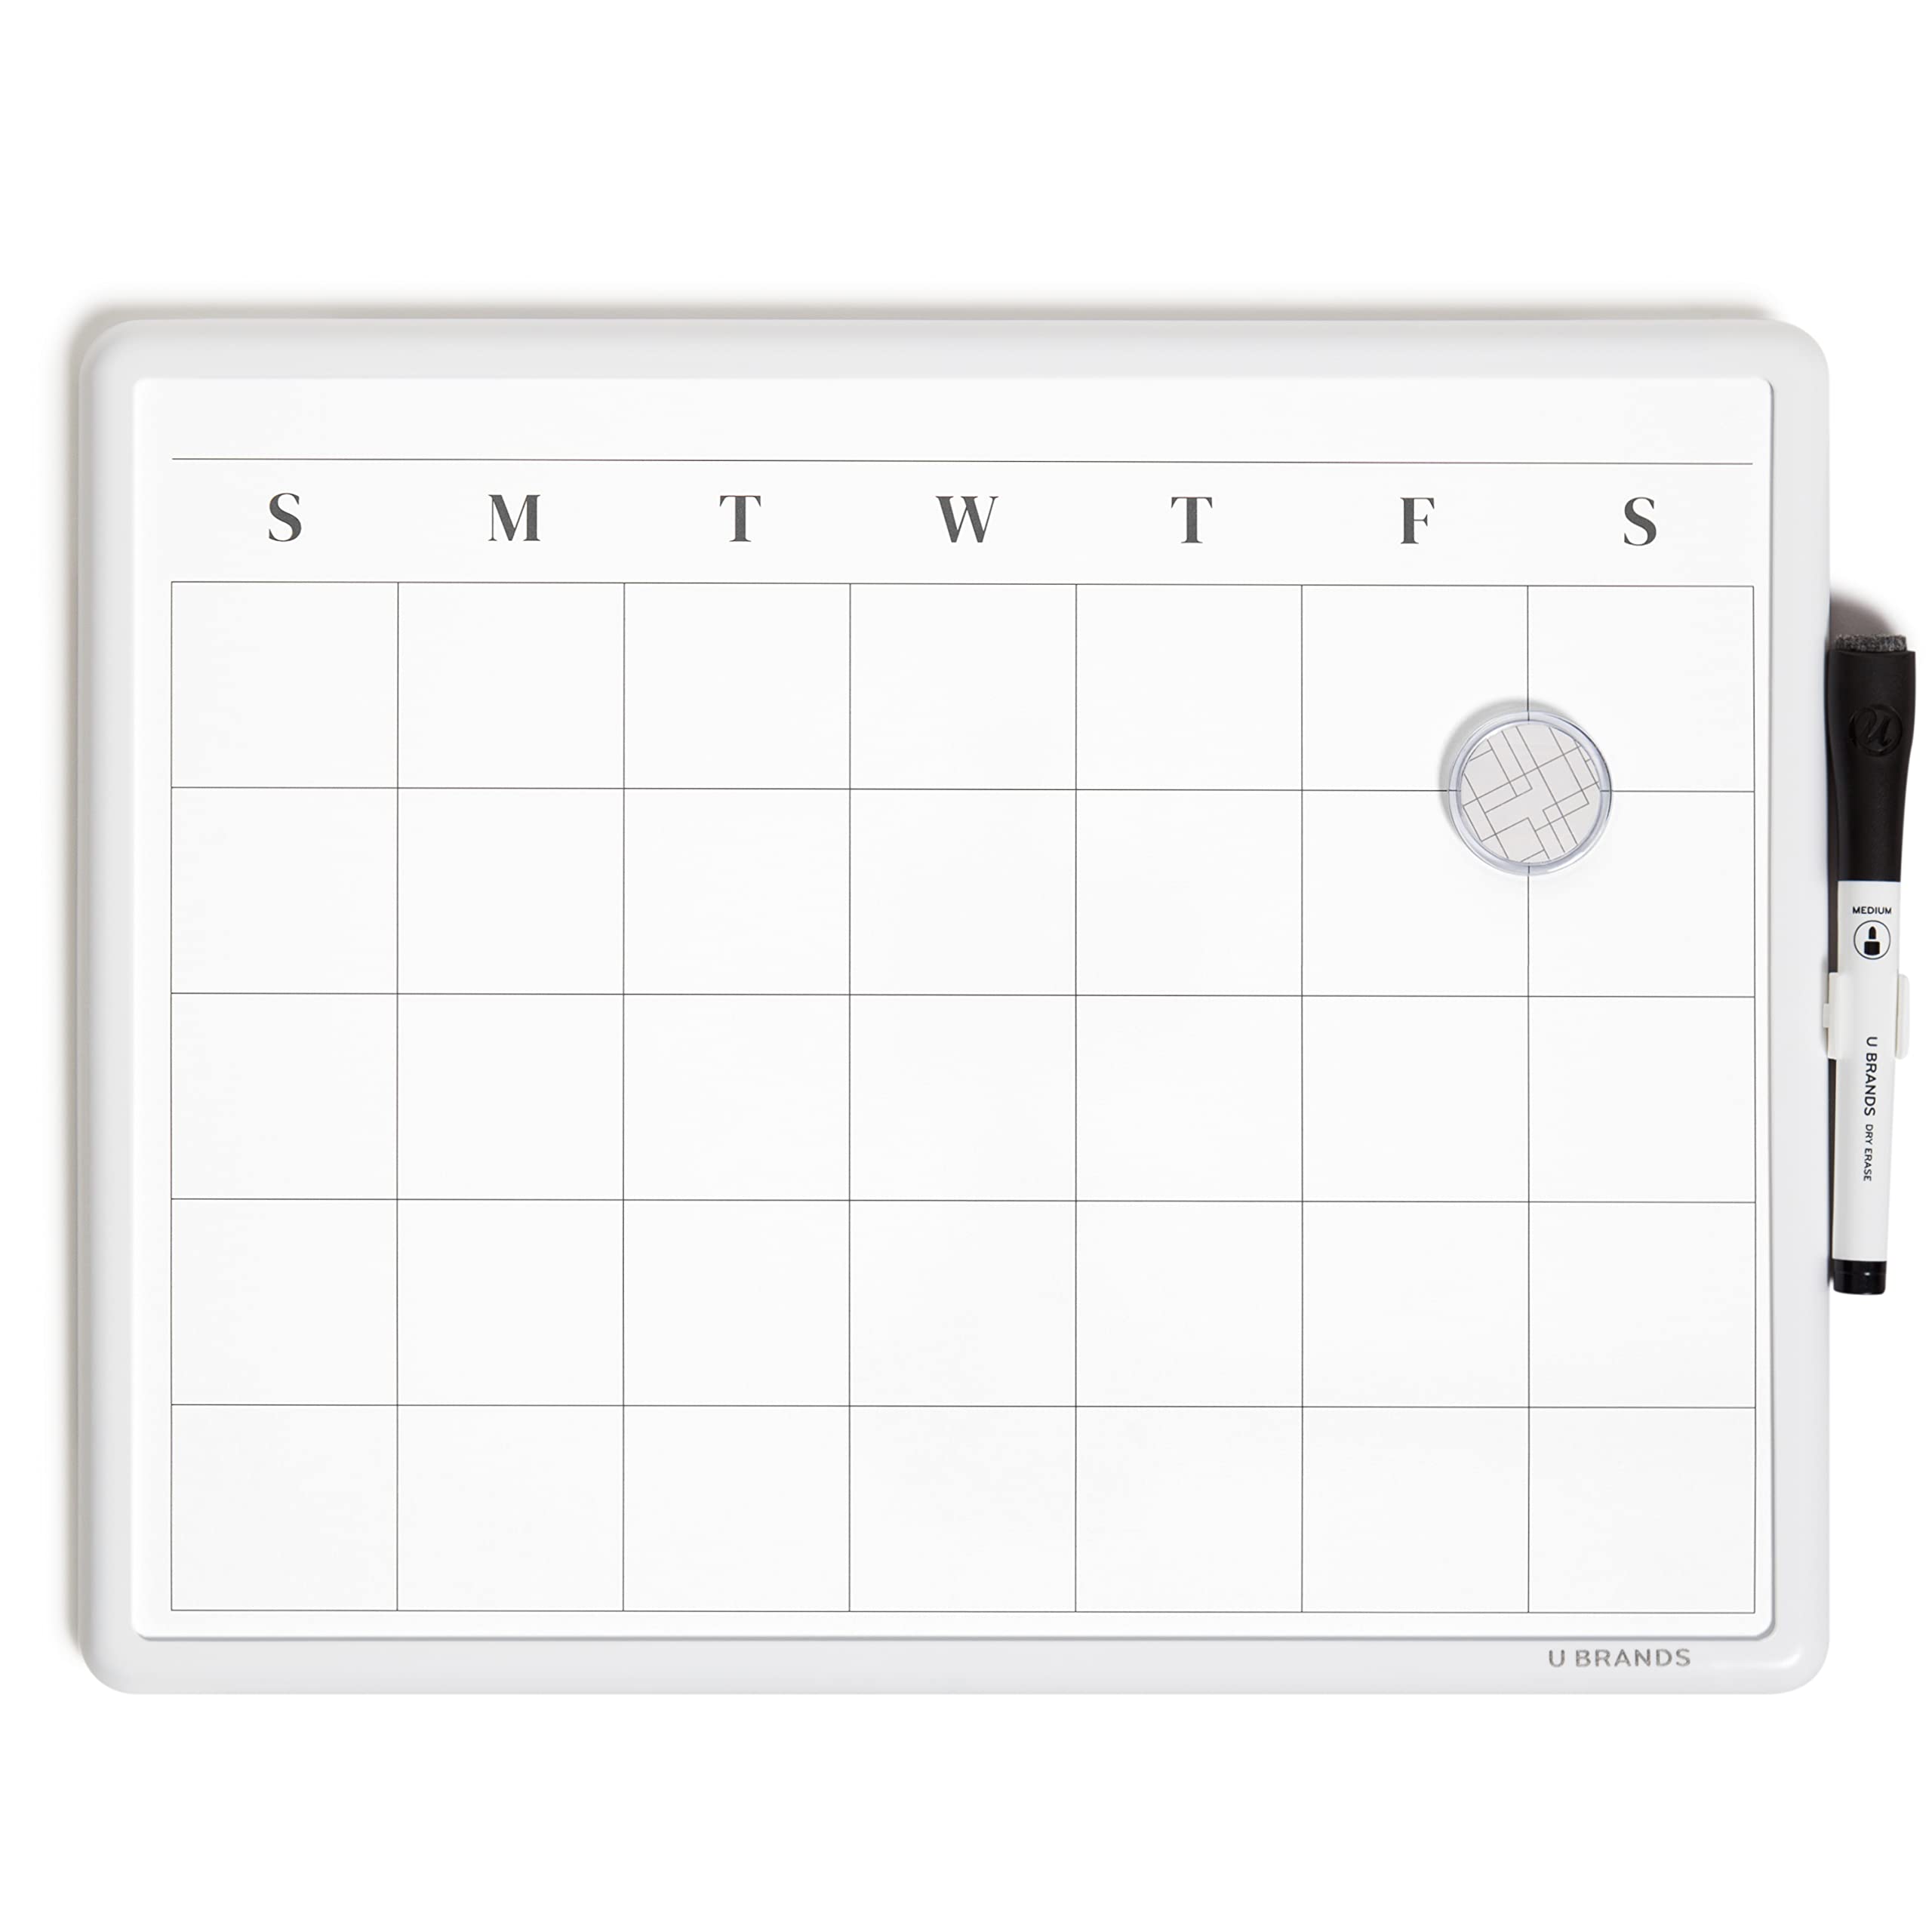 11" x 14" U Brands Contempo Magnetic Monthly Calendar Dry Erase Board w/ Dry Erase Marker (White Frame) $5.78 + Free Shipping w/ Prime or on $35+